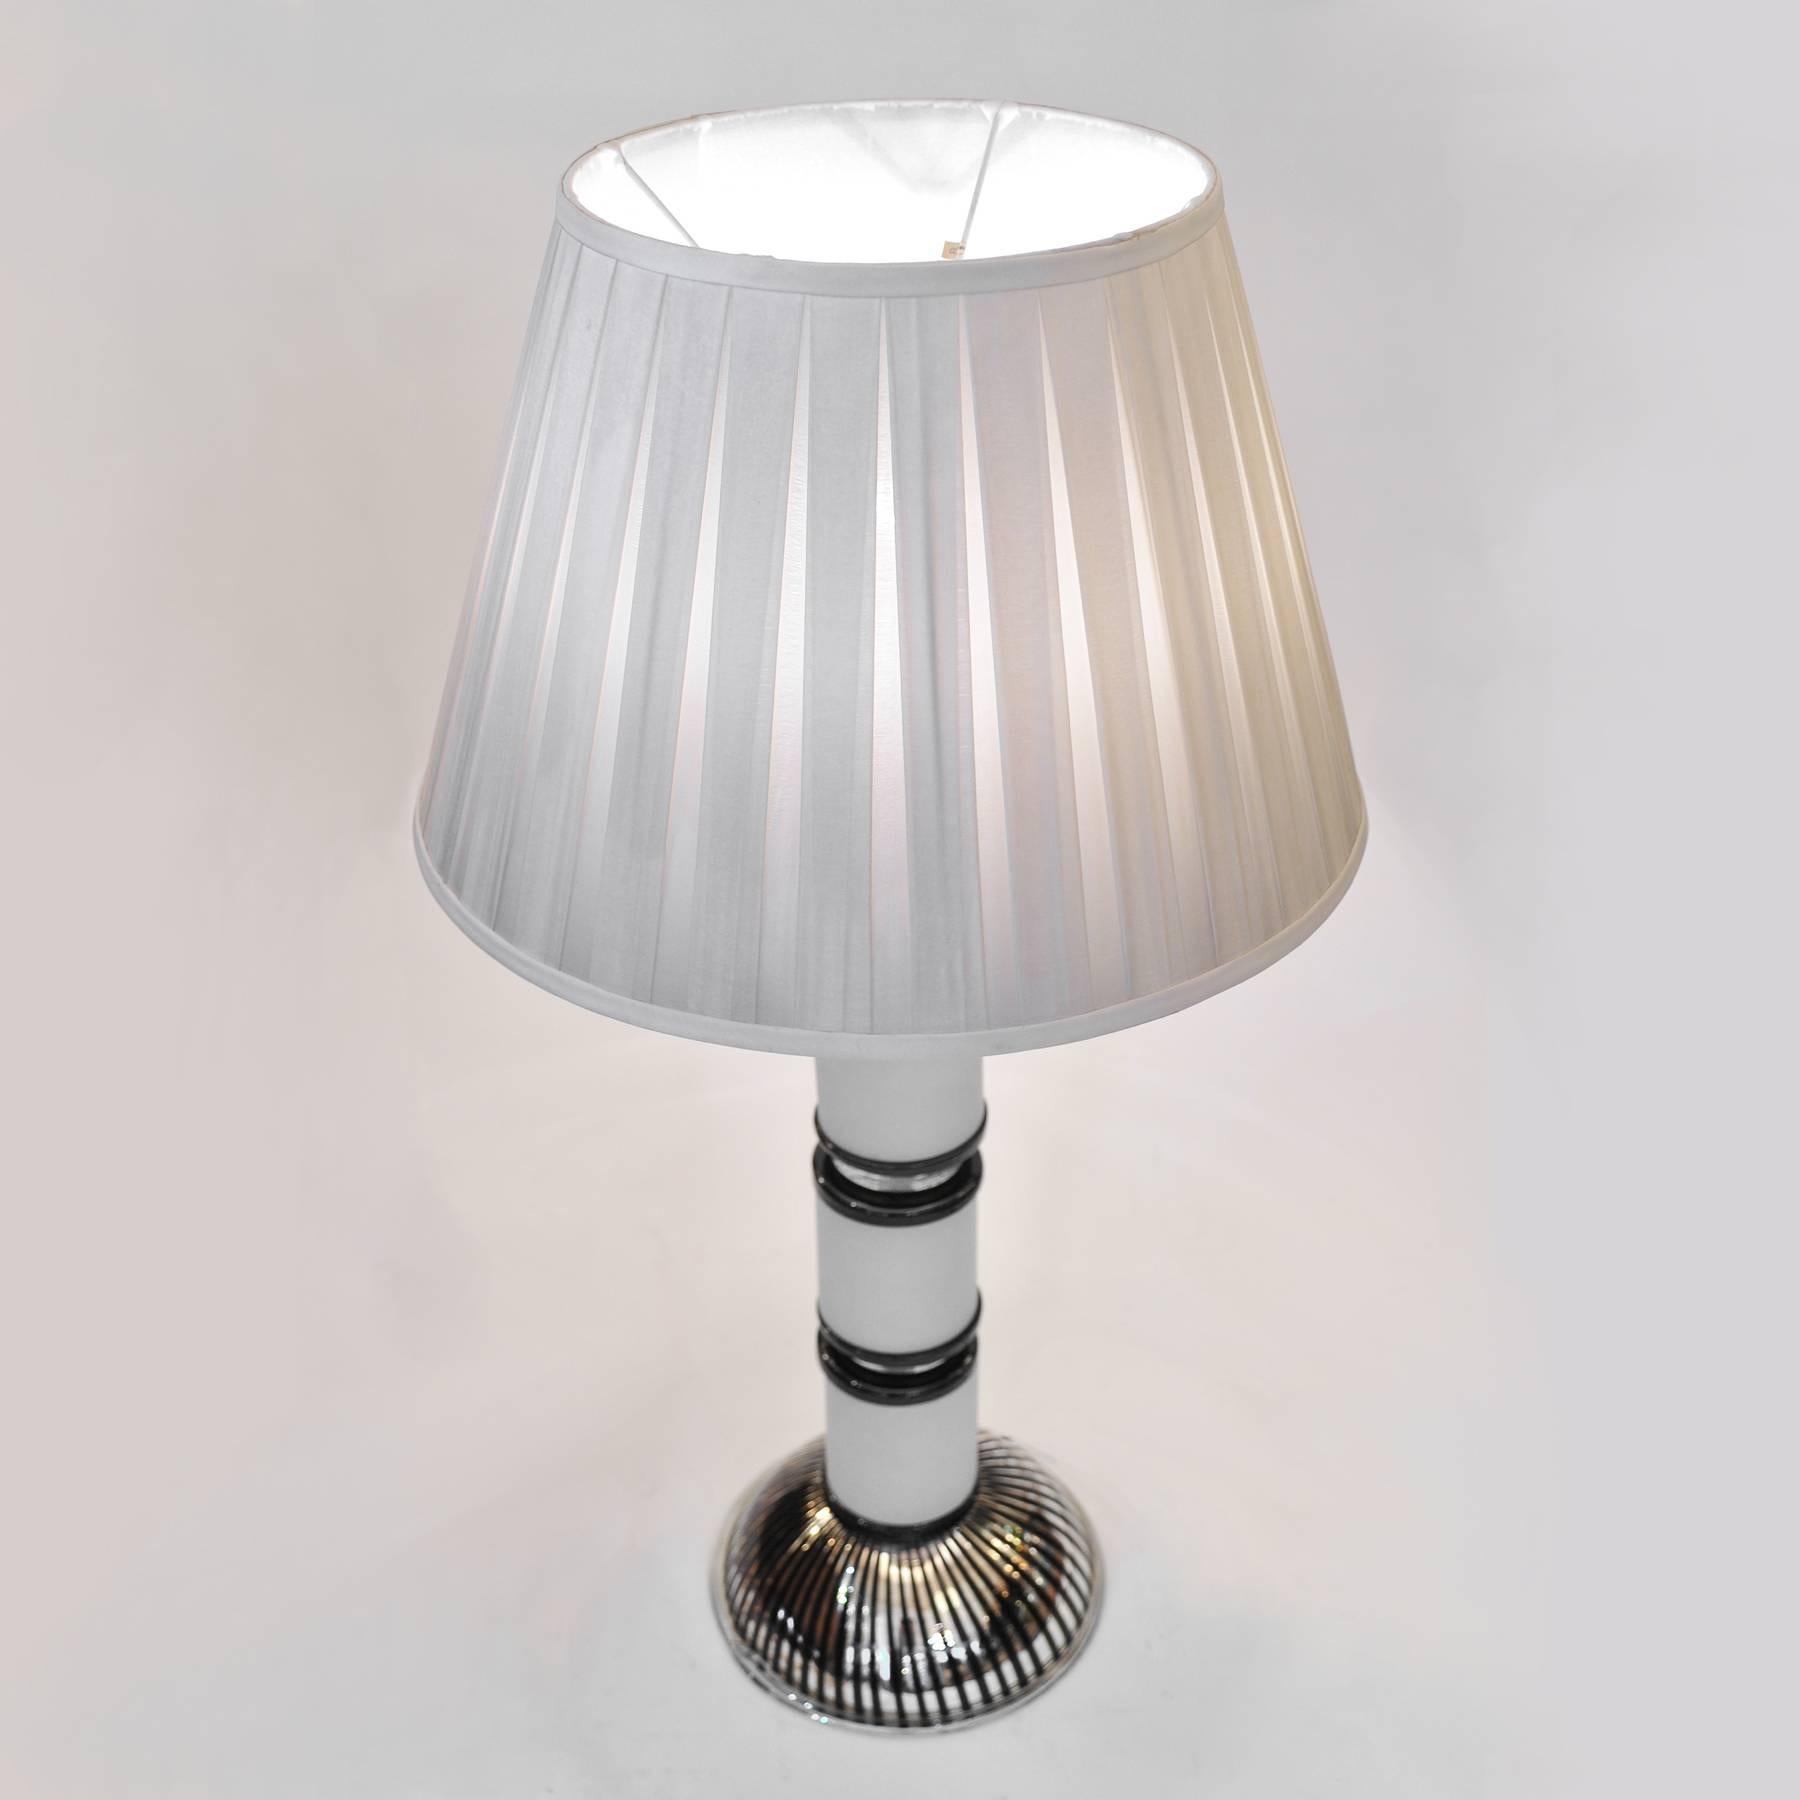 Late 20th Century Italian 1970s Glass Table Lamps